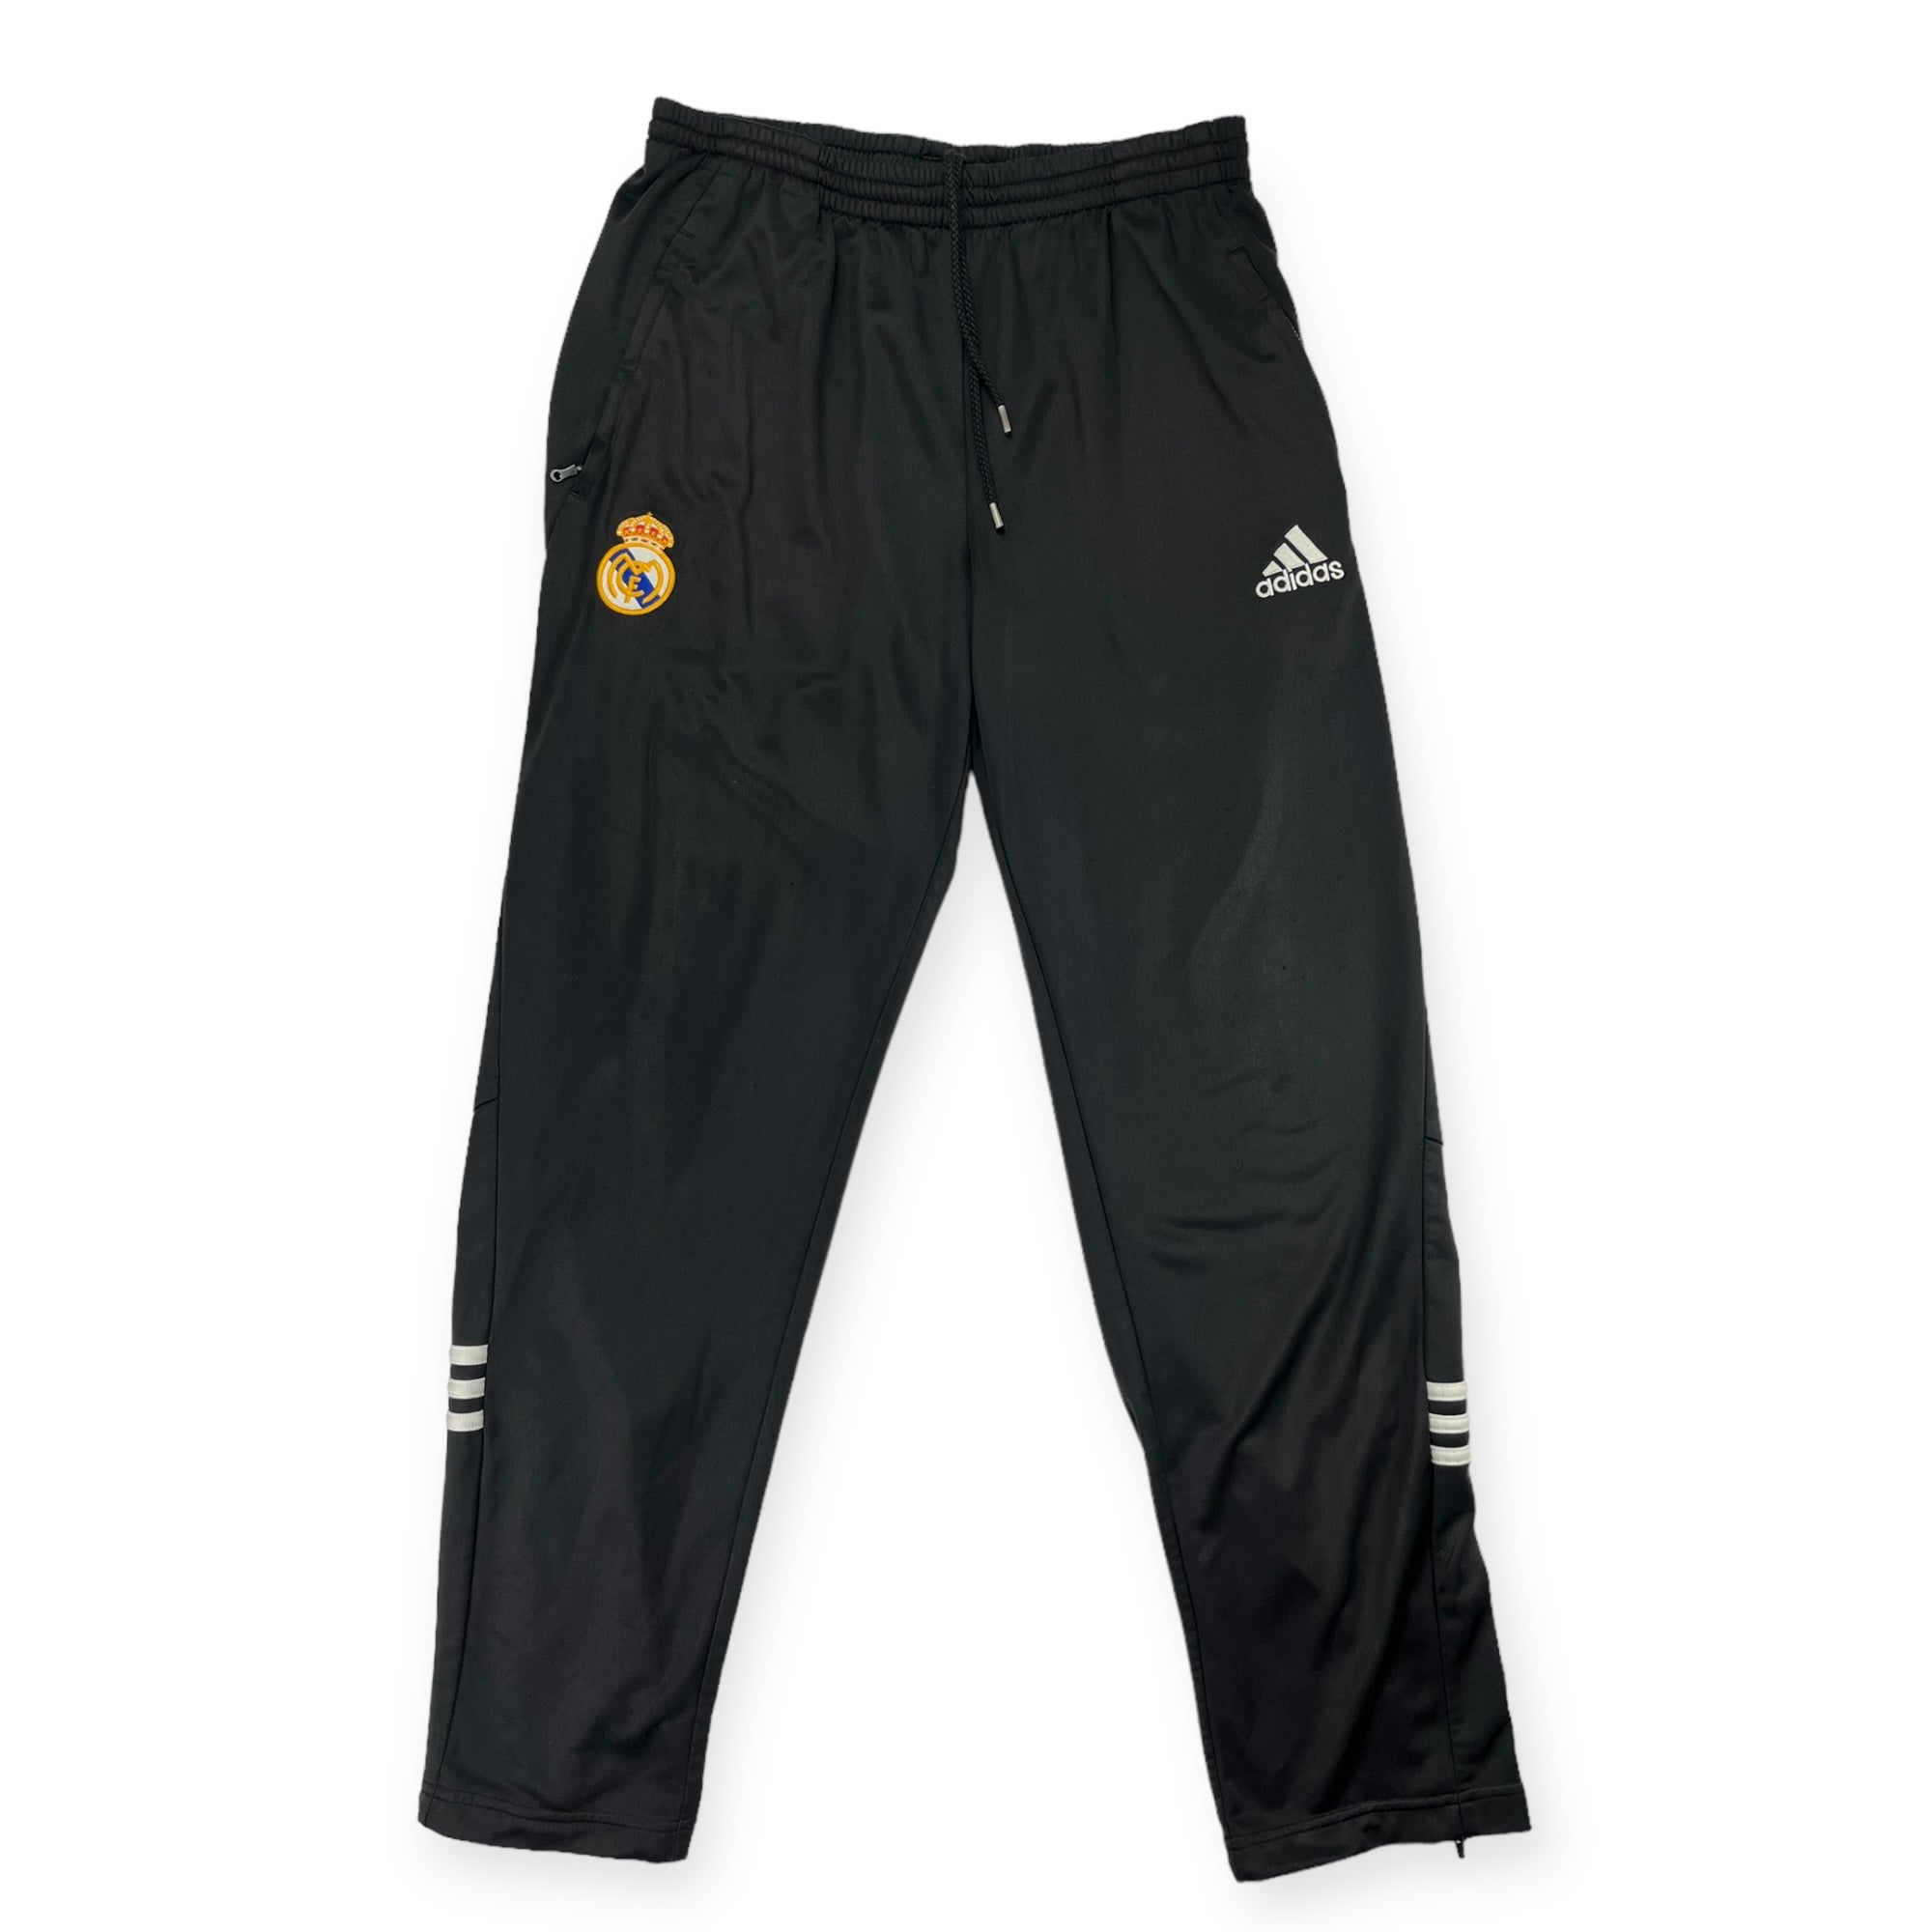 Real Madrid 2002 Tracksuit Bottoms